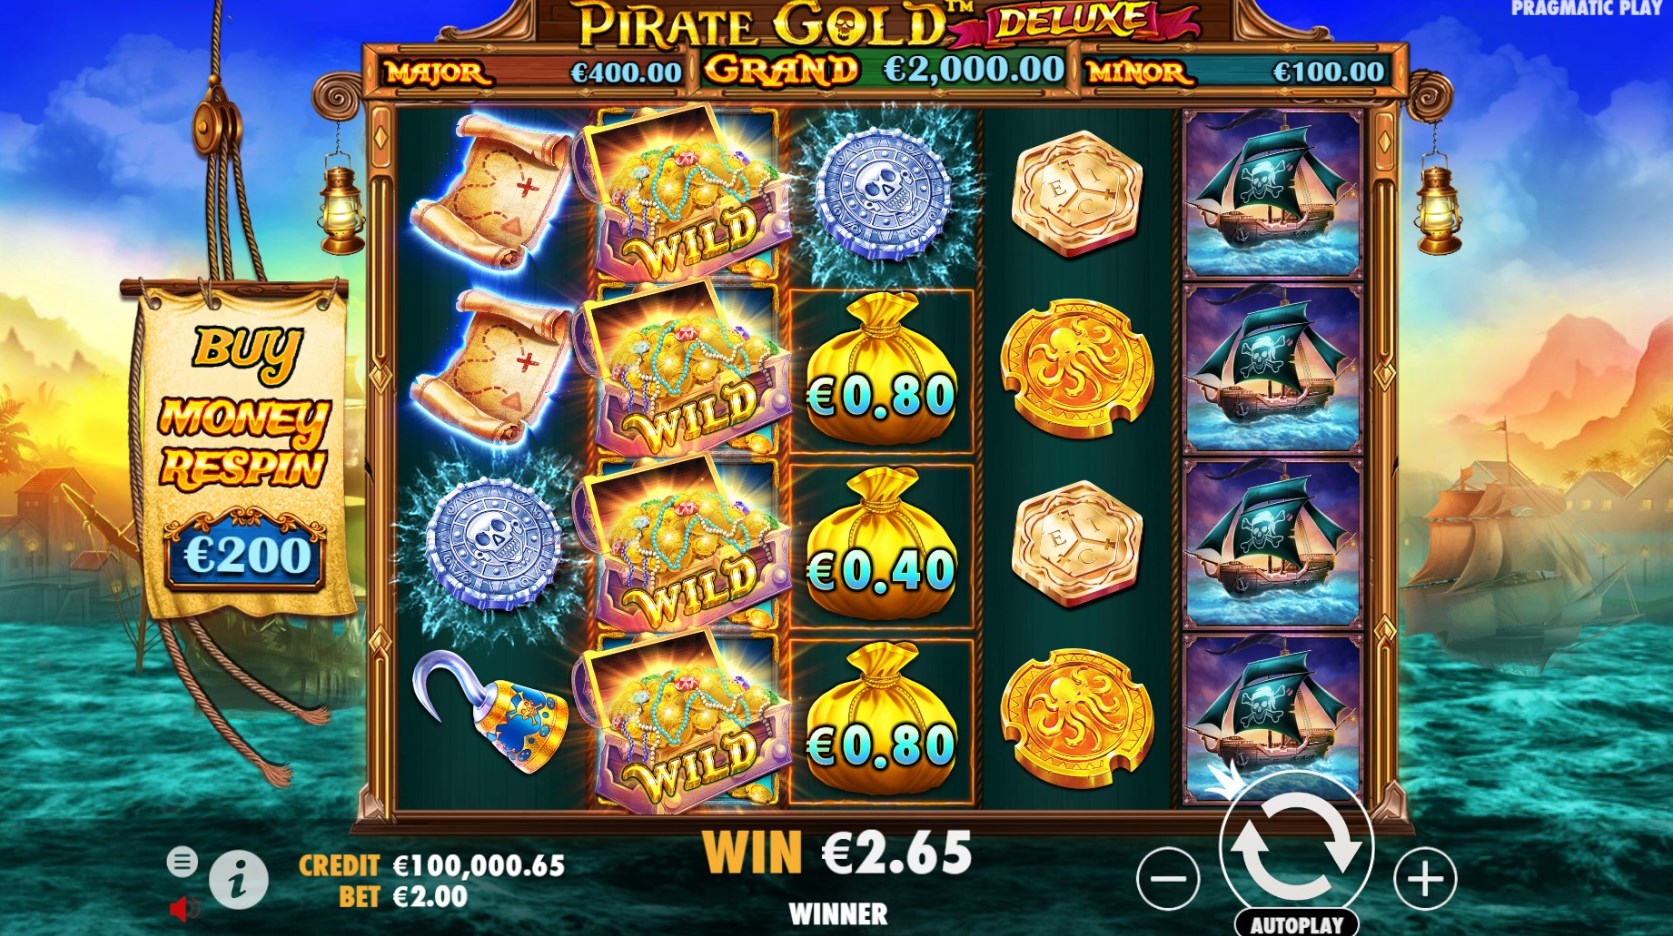 Pirate Gold Deluxe pragmatic play apk download for android  1.0.0 screenshot 2